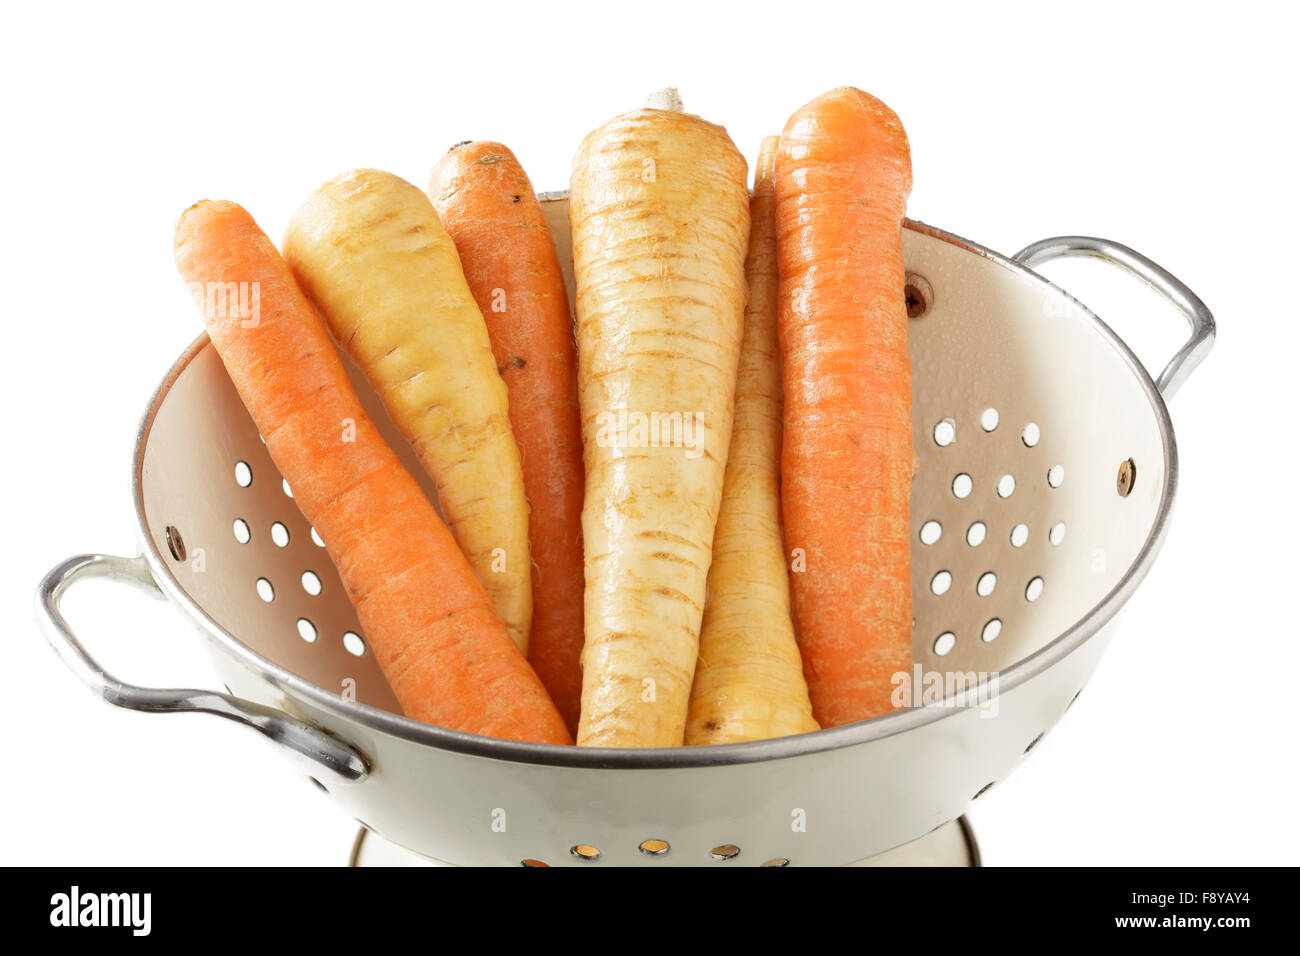 Carrots and parsnips in colander Stock Photo